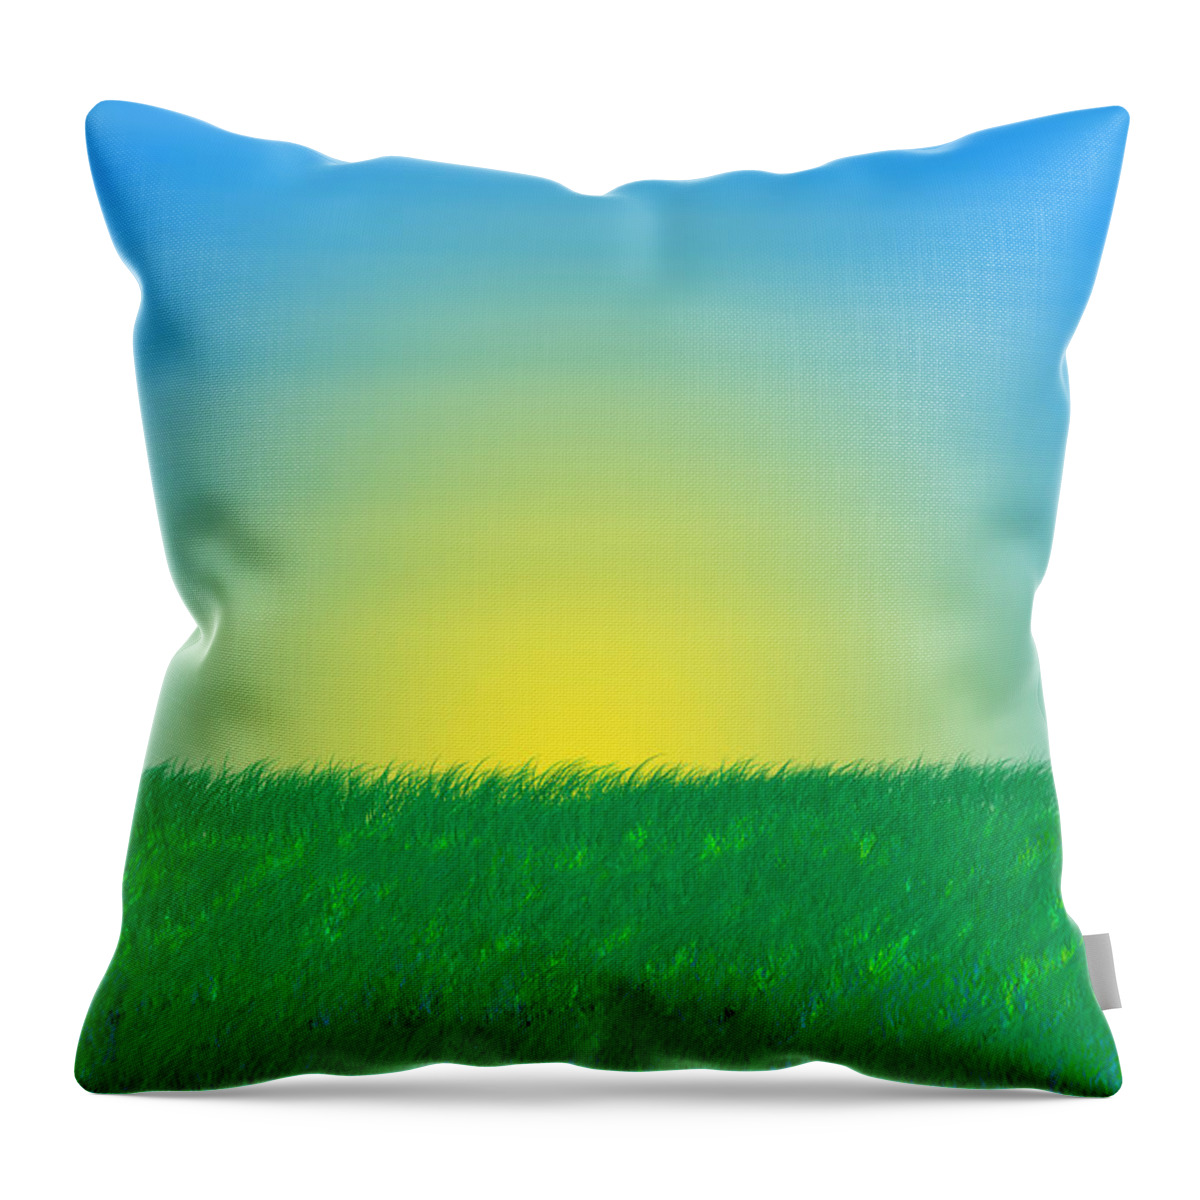 Country Side Throw Pillow featuring the digital art Good Morning by Saad Hasnain